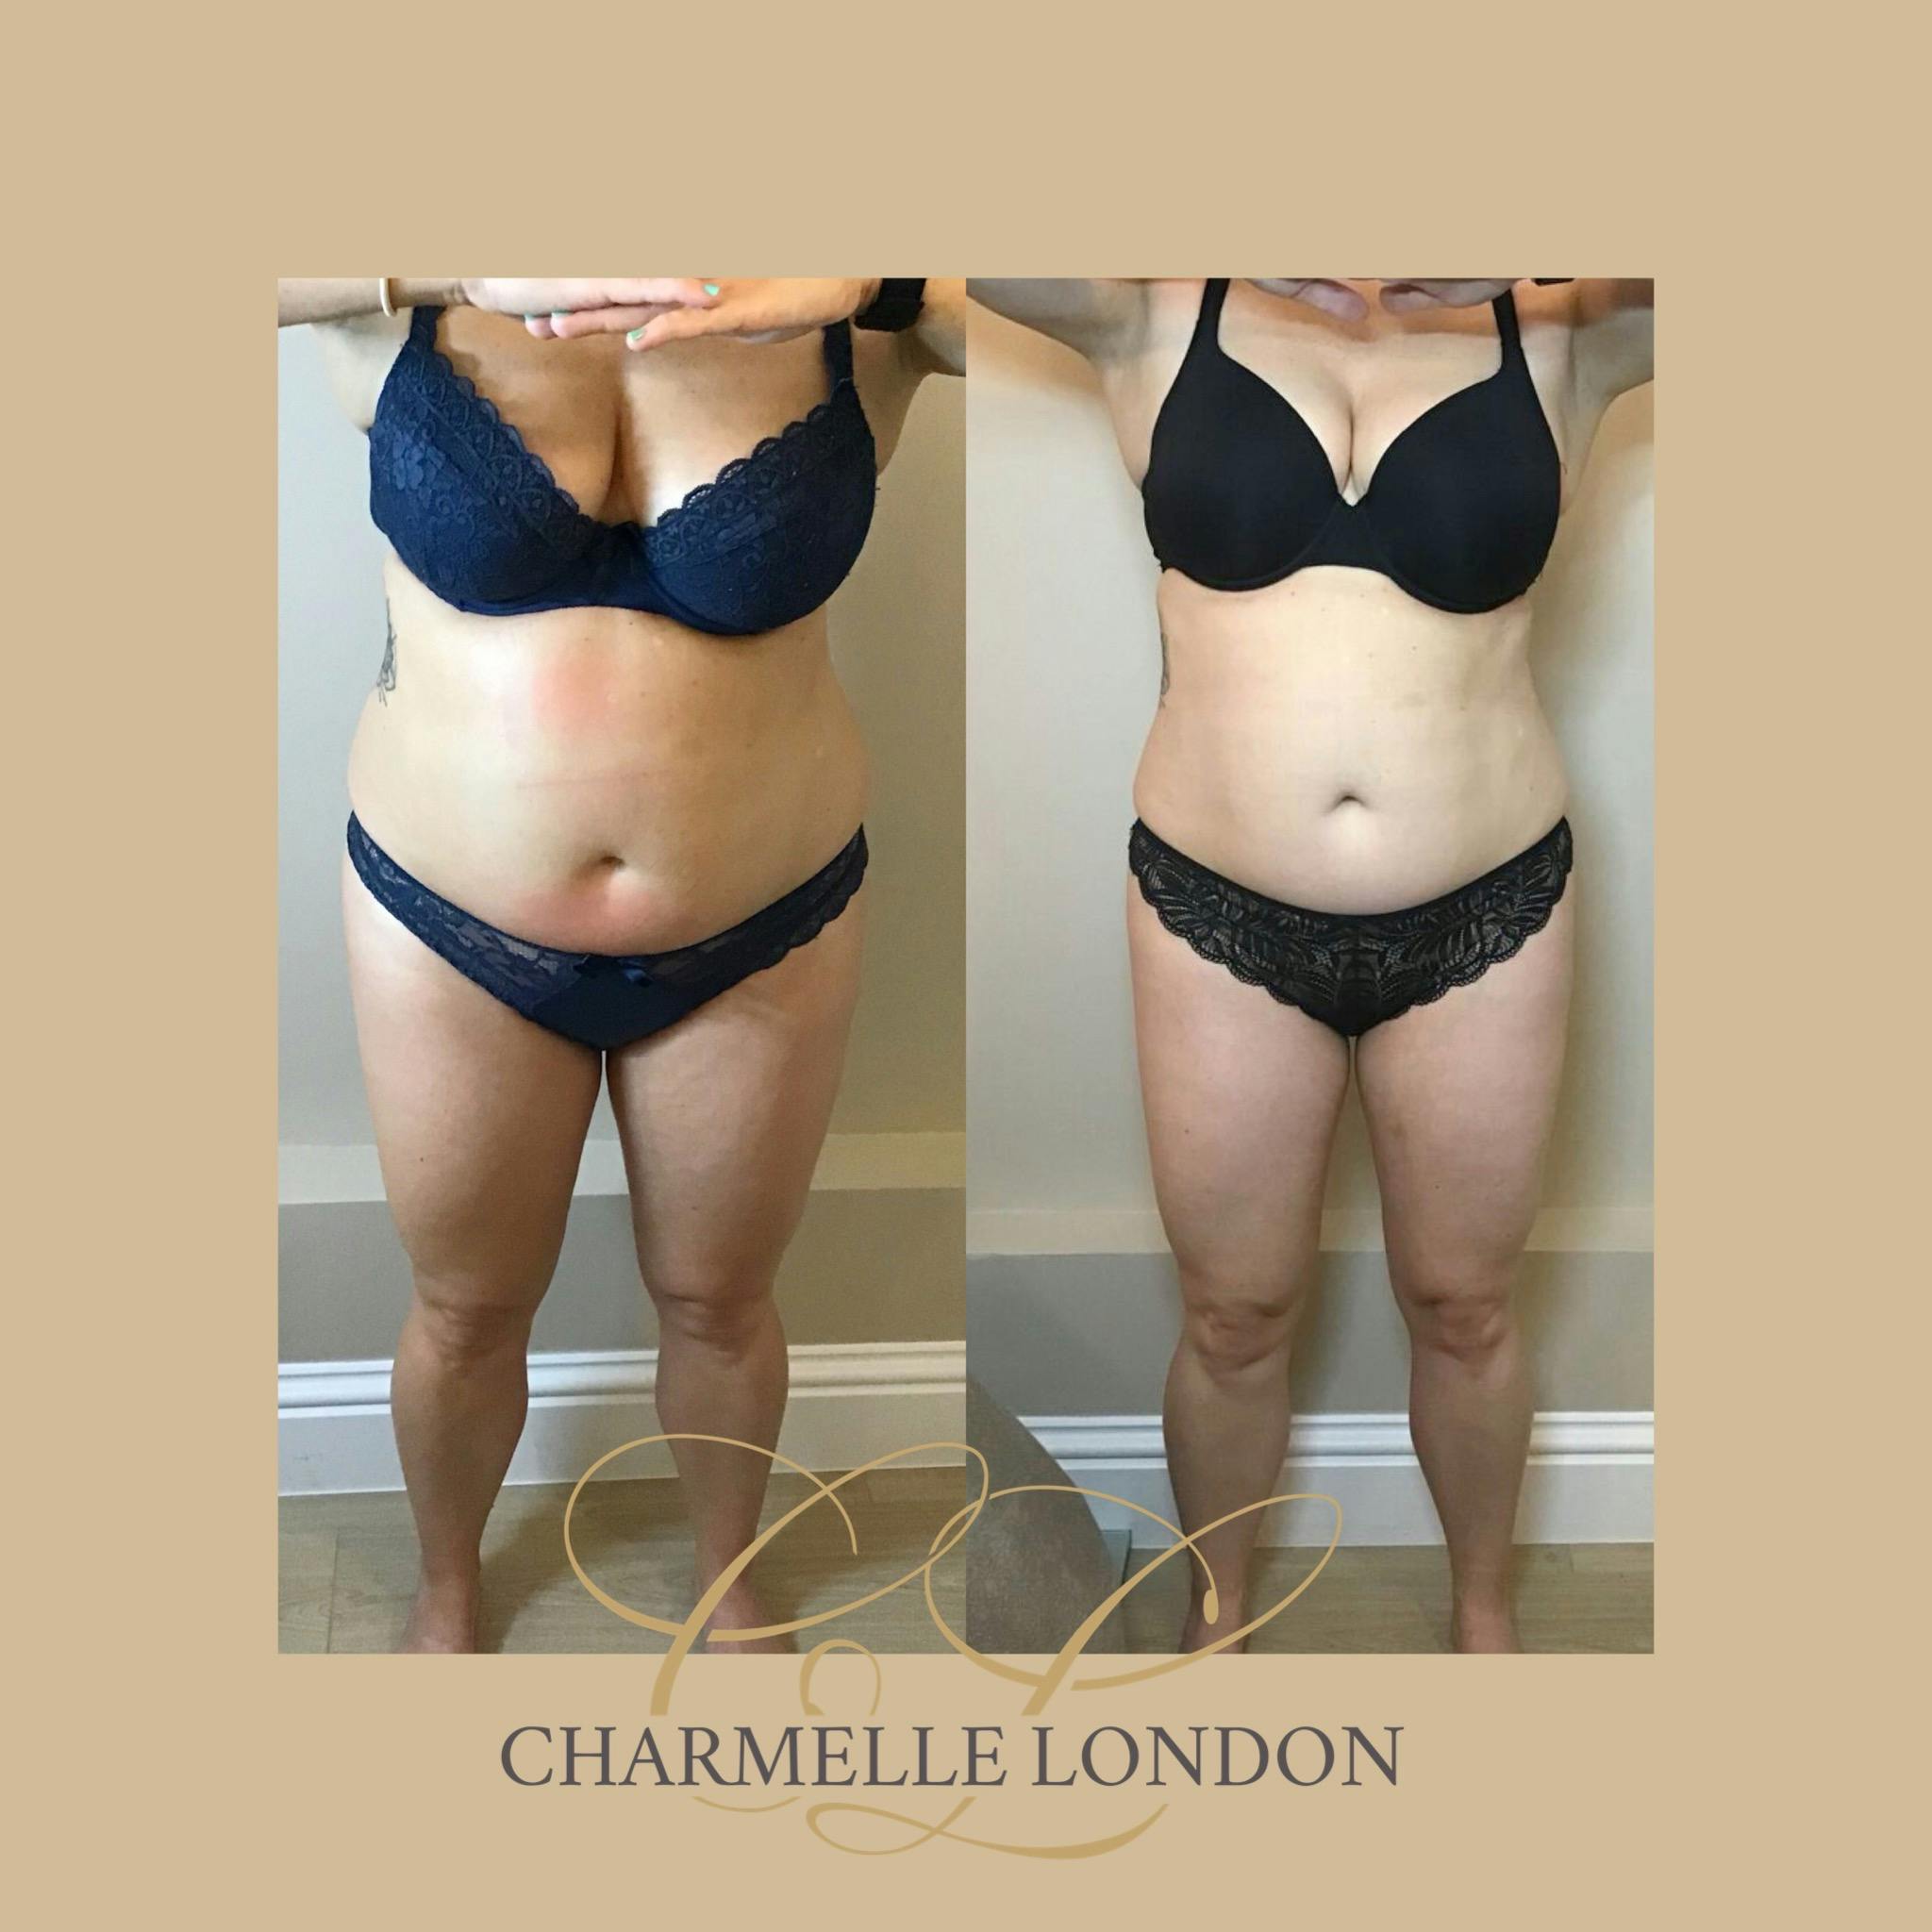 3D 5 Point Lift Using a Unique Combination of the latest non- surgical technologies Cryolipolysis, Body HIFU and shockwave, we can specifically sculpt and shape your most tricky stubborn areas for an overall solution. Call 0333 016 3500.